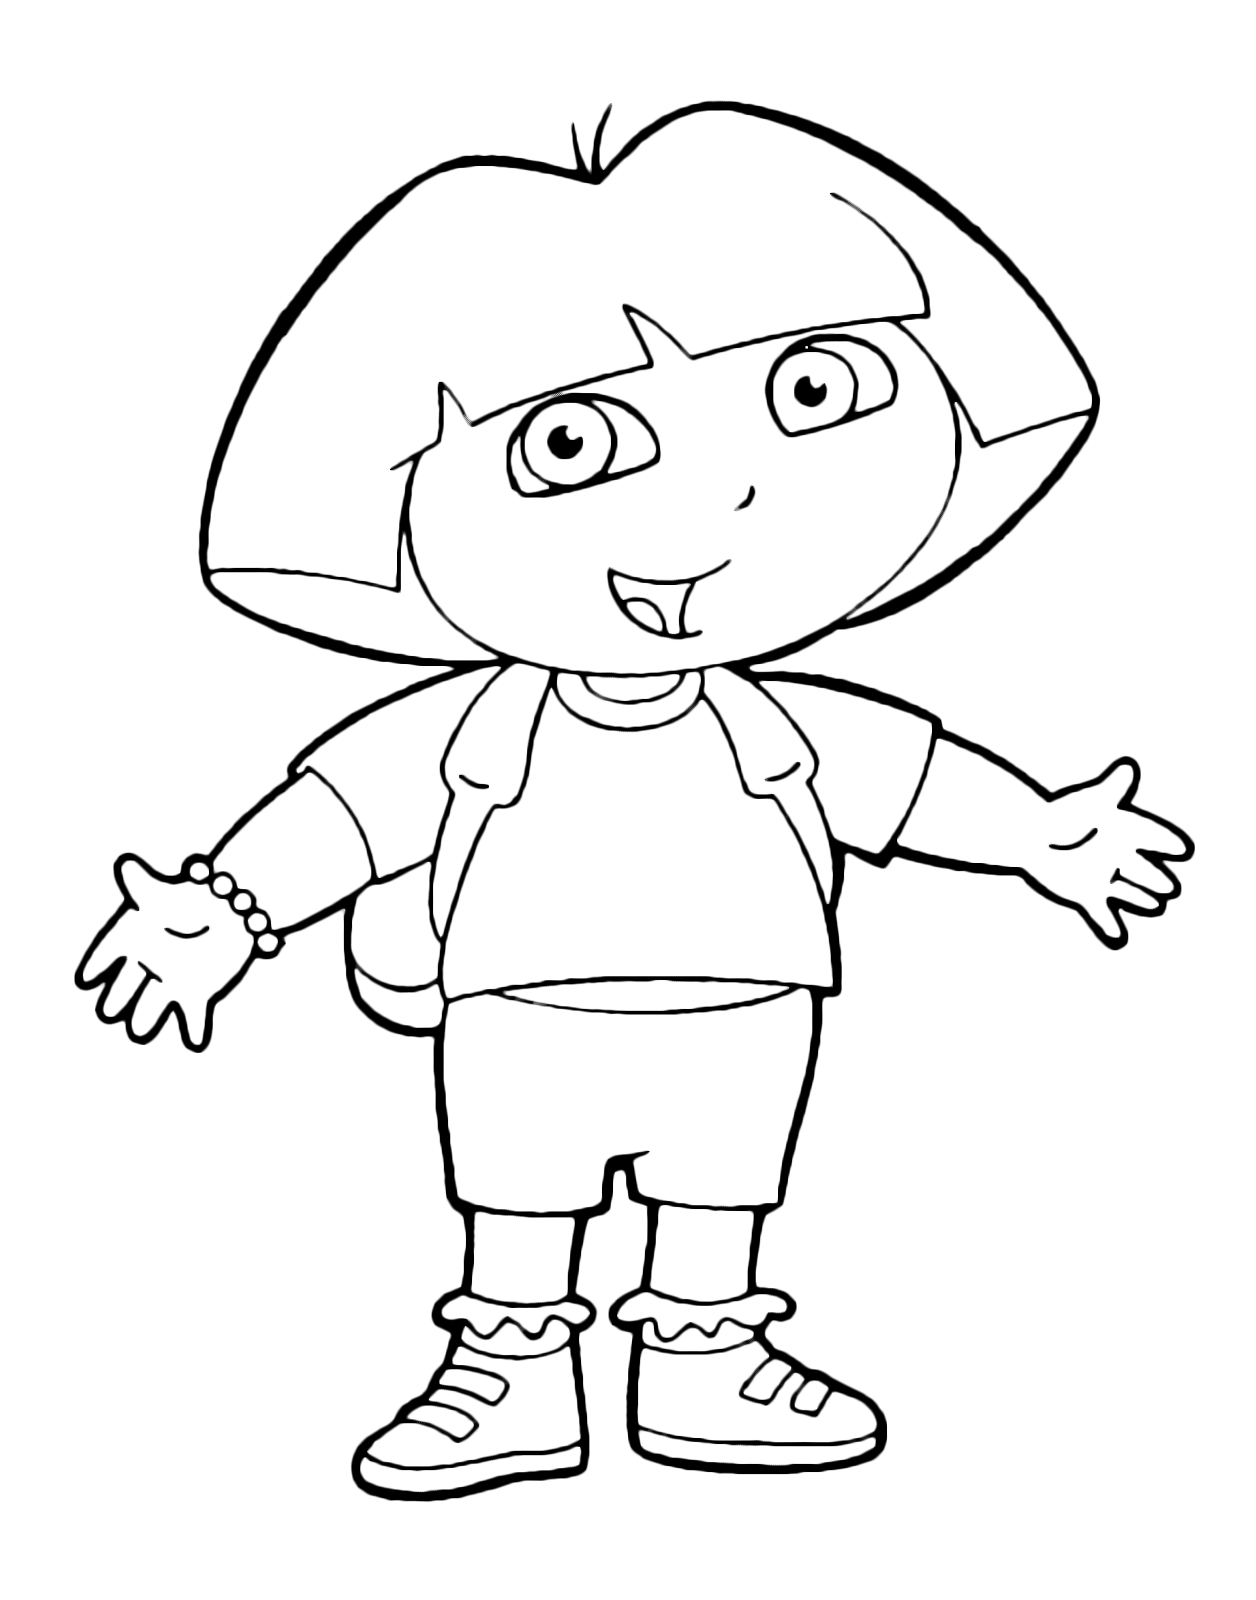 Dora the Explorer #29877 (Cartoons) – Free Printable Coloring Pages